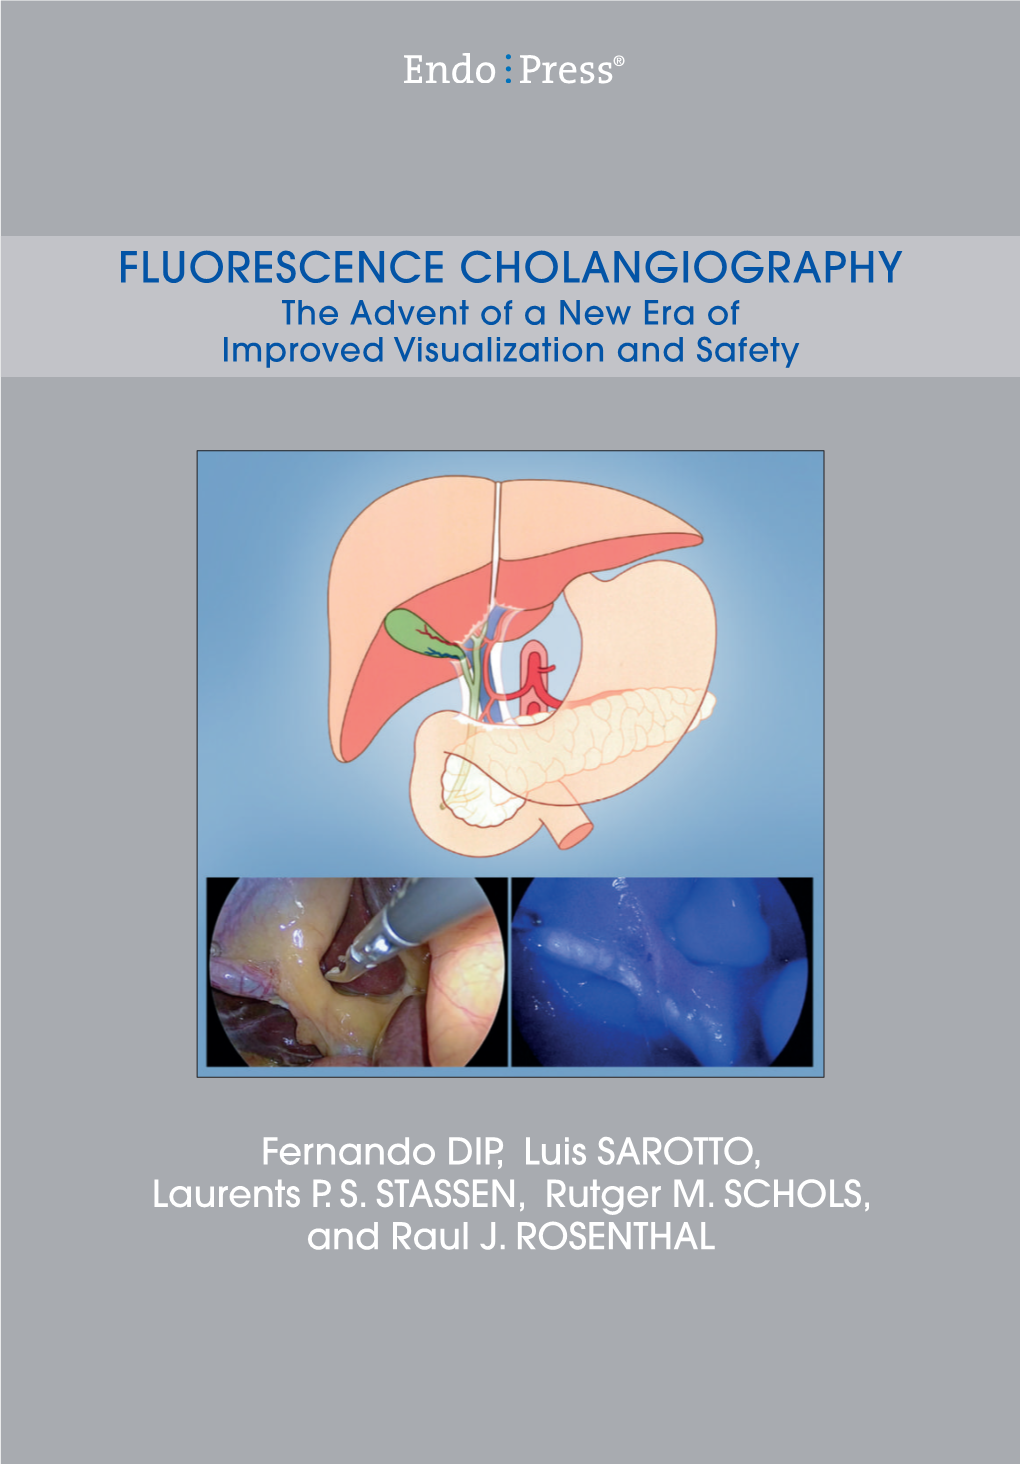 FLUORESCENCE CHOLANGIOGRAPHY the Advent of a New Era of Improved Visualization and Safety